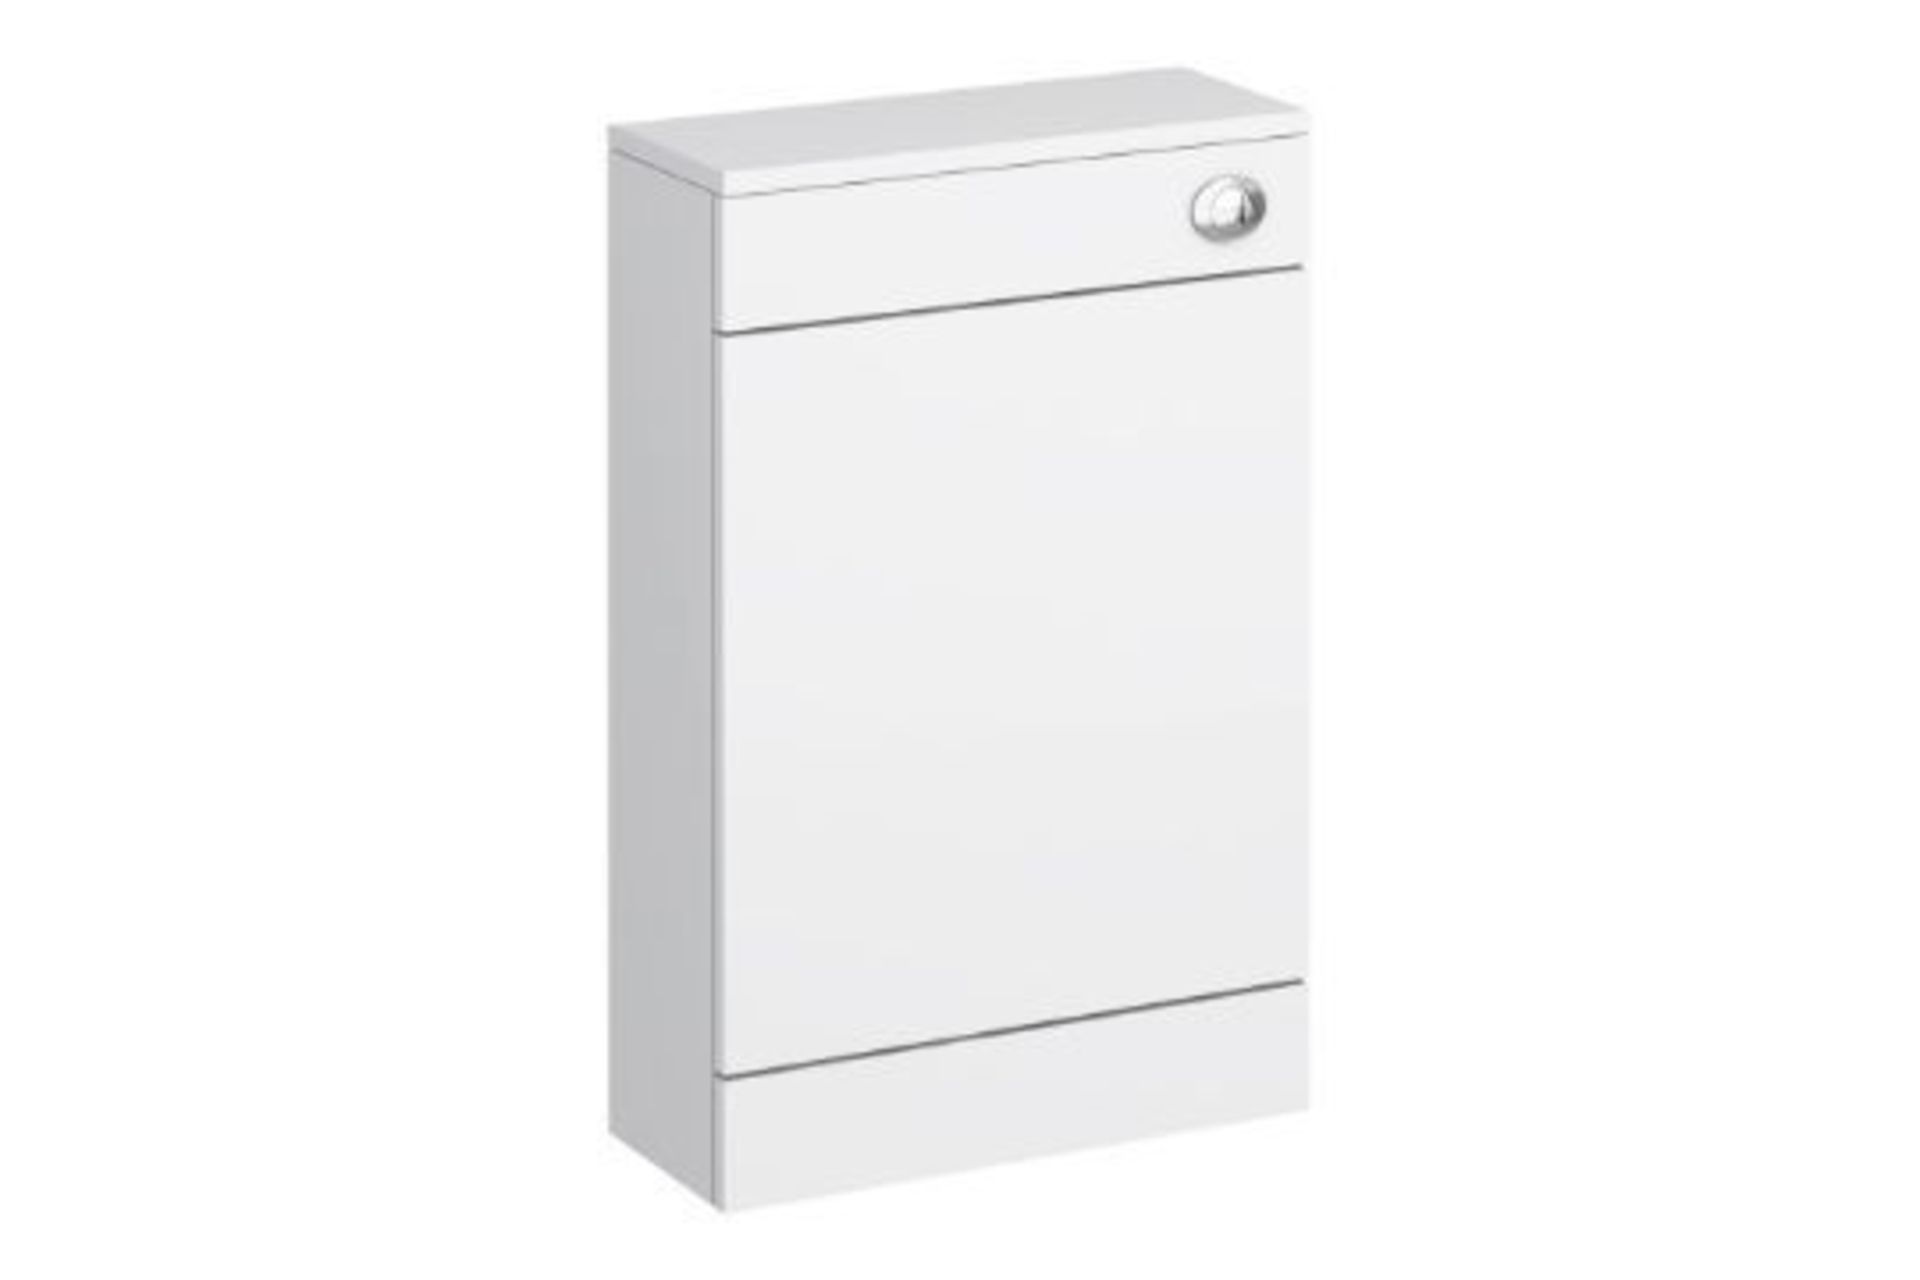 NEW BOXED Sienna High Gloss White WC Unit with Concealed Cistern W500 x D200mm - NVS142. RRP £199.